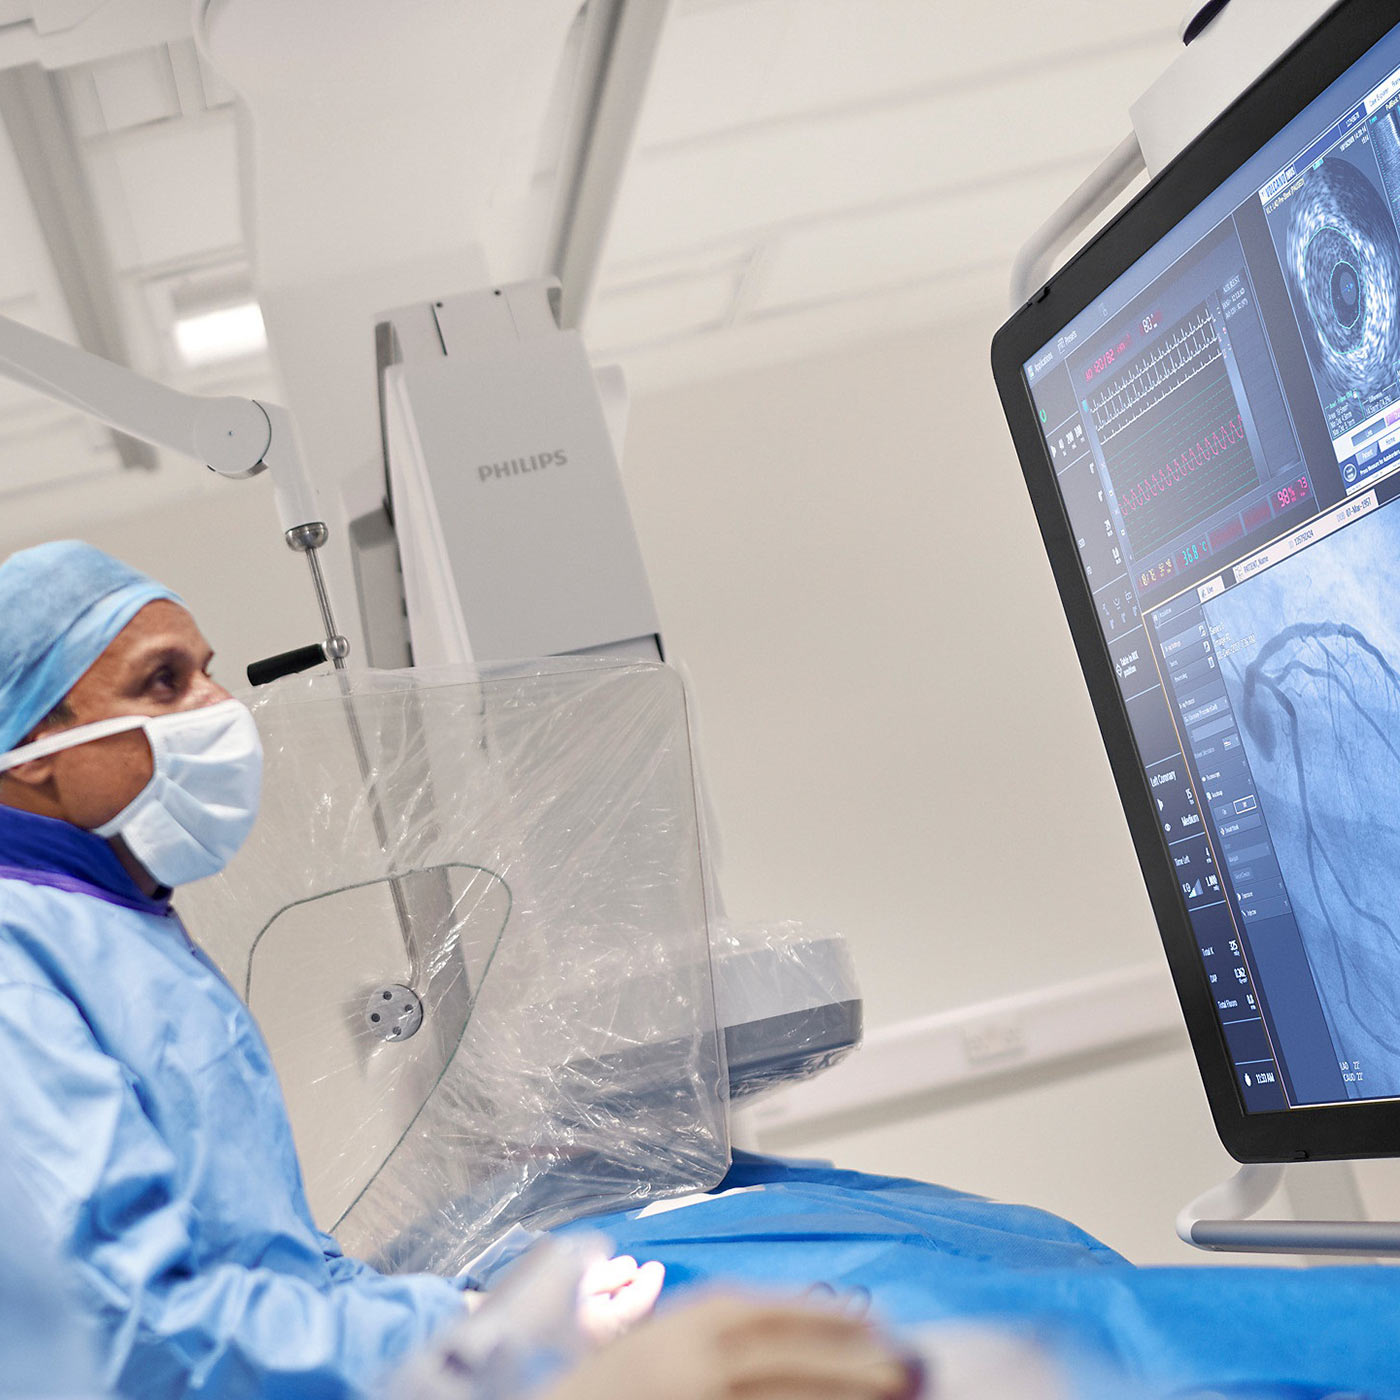 Azurion image guided therapy platform